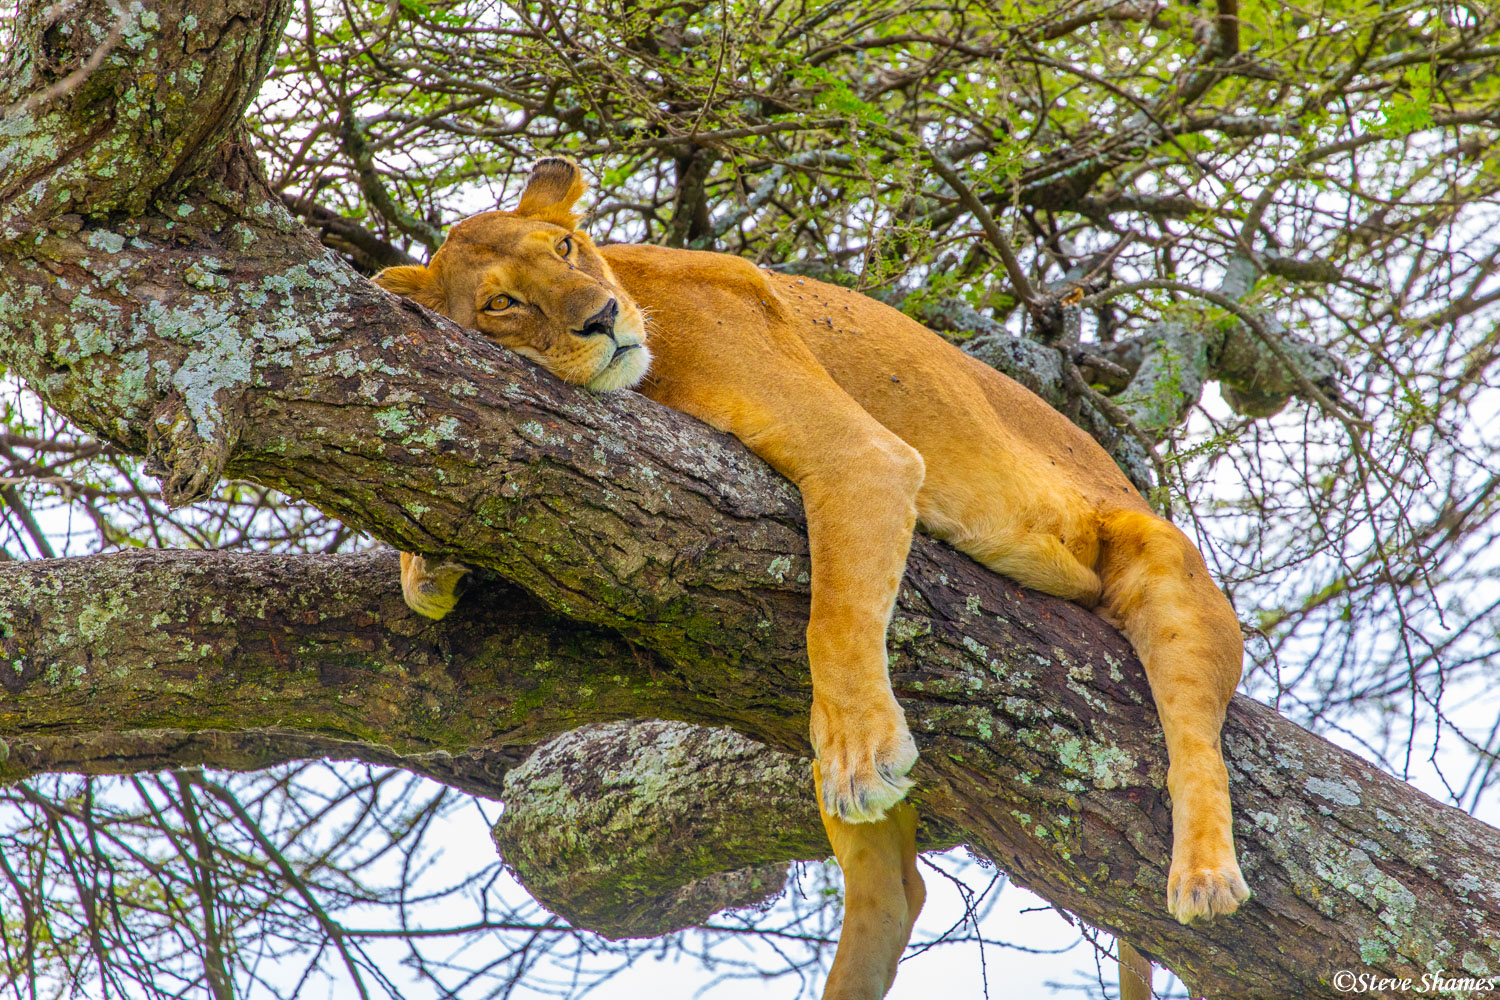 Here is a picture of relaxation. A lioness lounging in a tree.